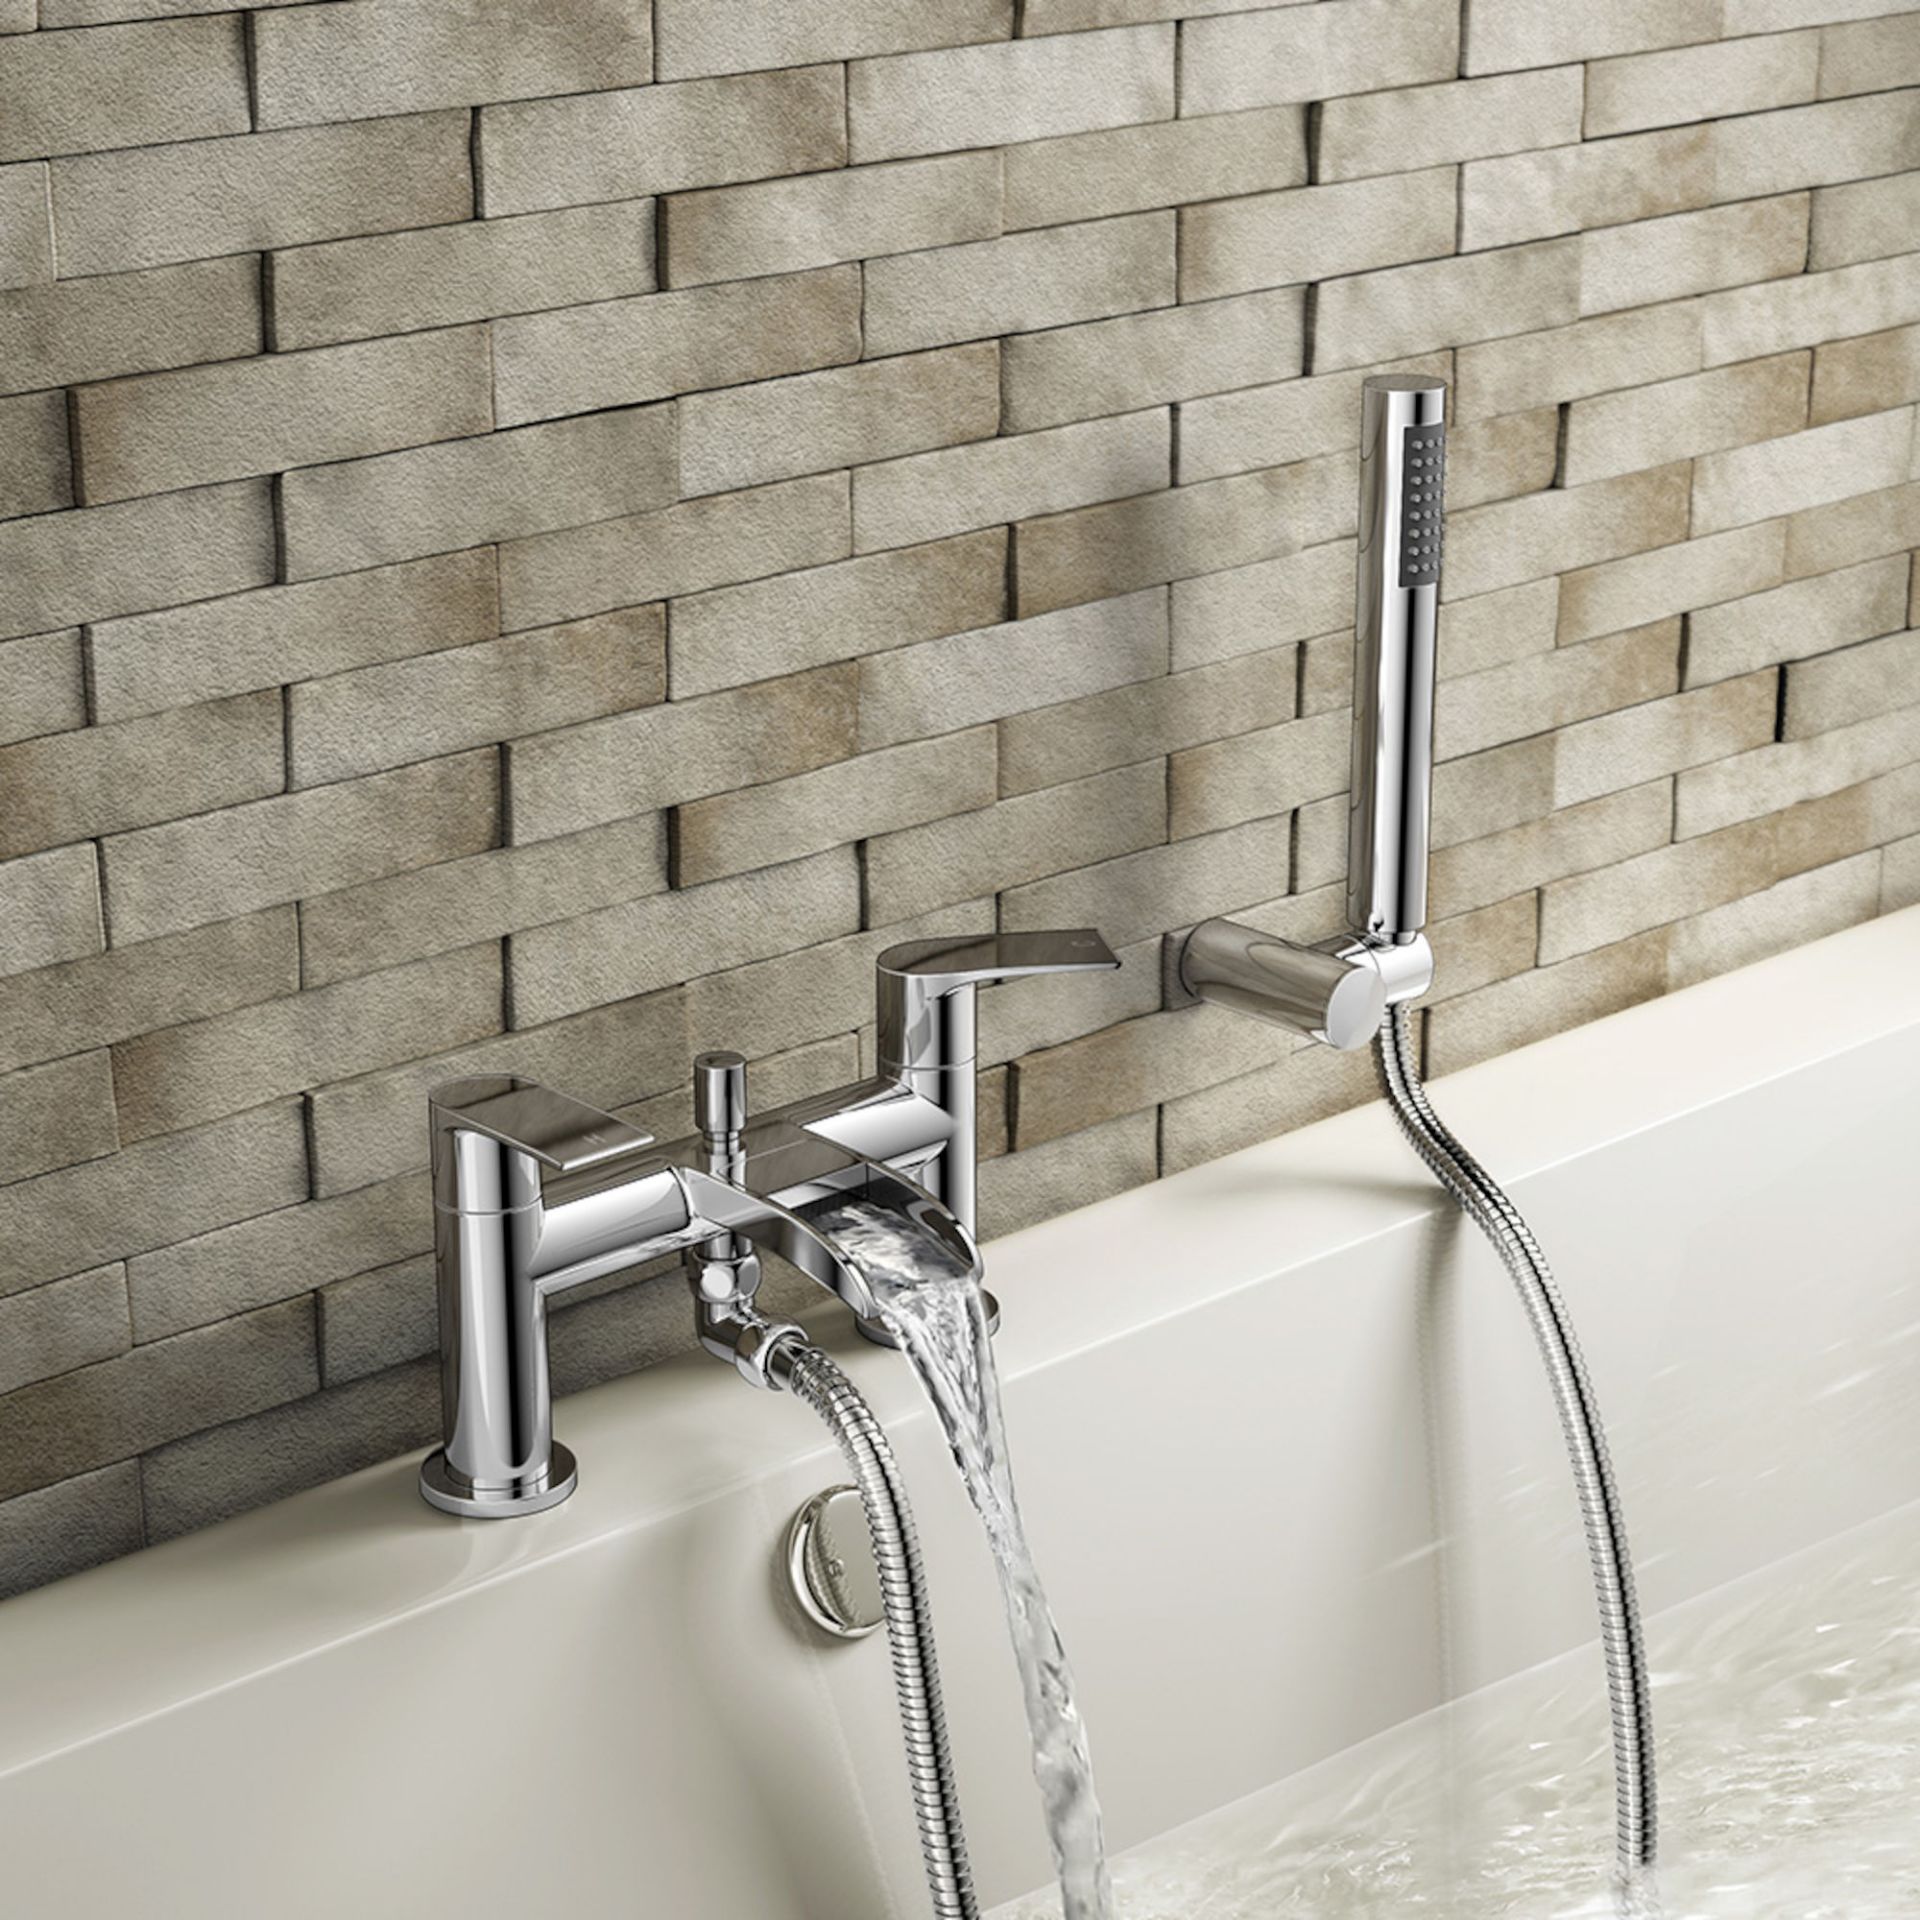 (PT215) Denver Waterfall Bath Mixer Tap & Handheld Shower head Chrome Plated Solid Brass 1/4 turn - Image 3 of 3